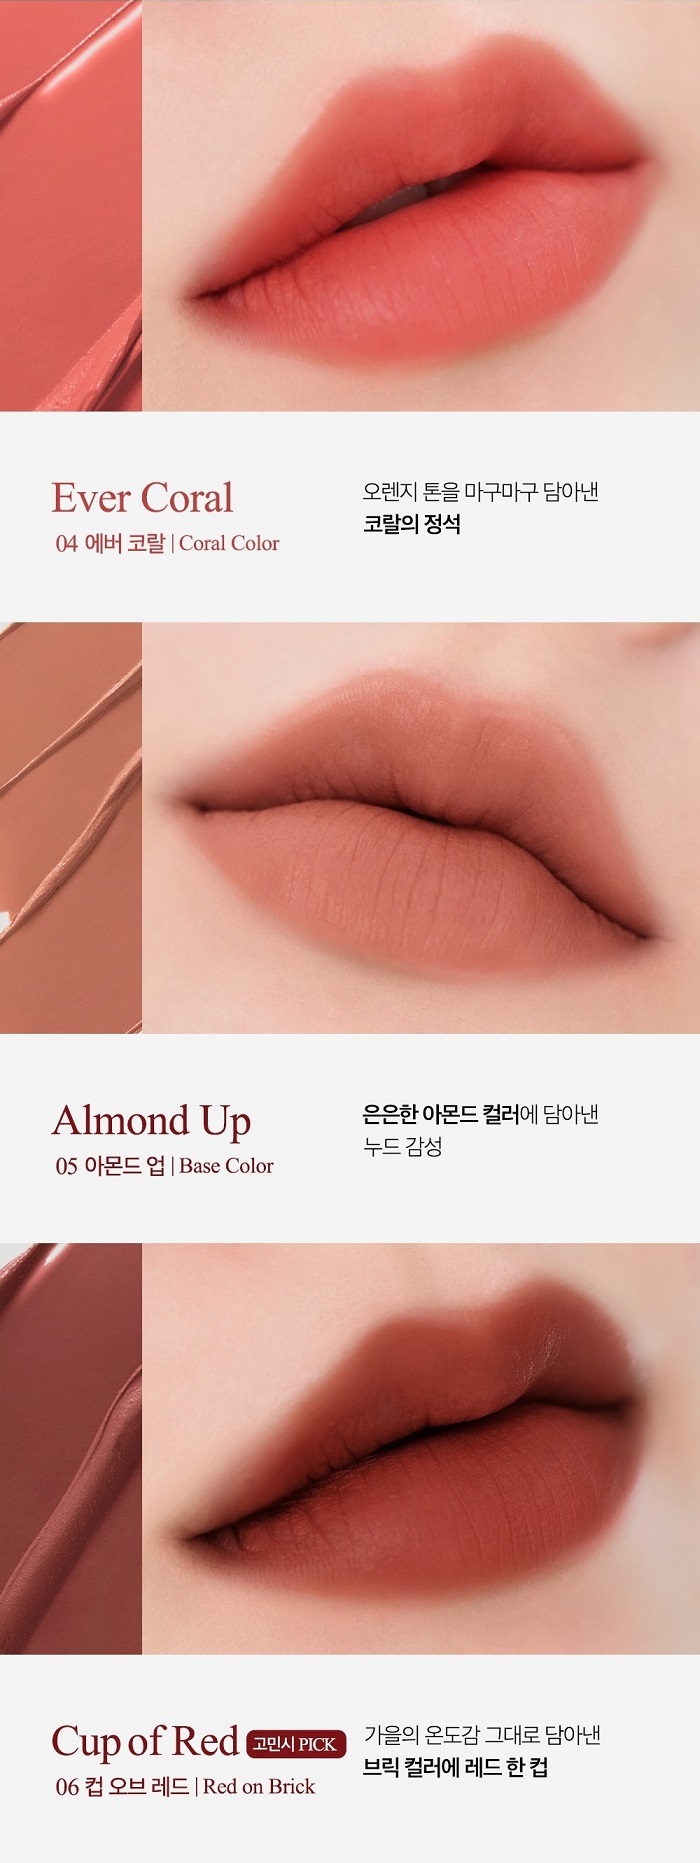 CLIO Chiffon Mood Lip Ever Coral Almond Up Cup of Red